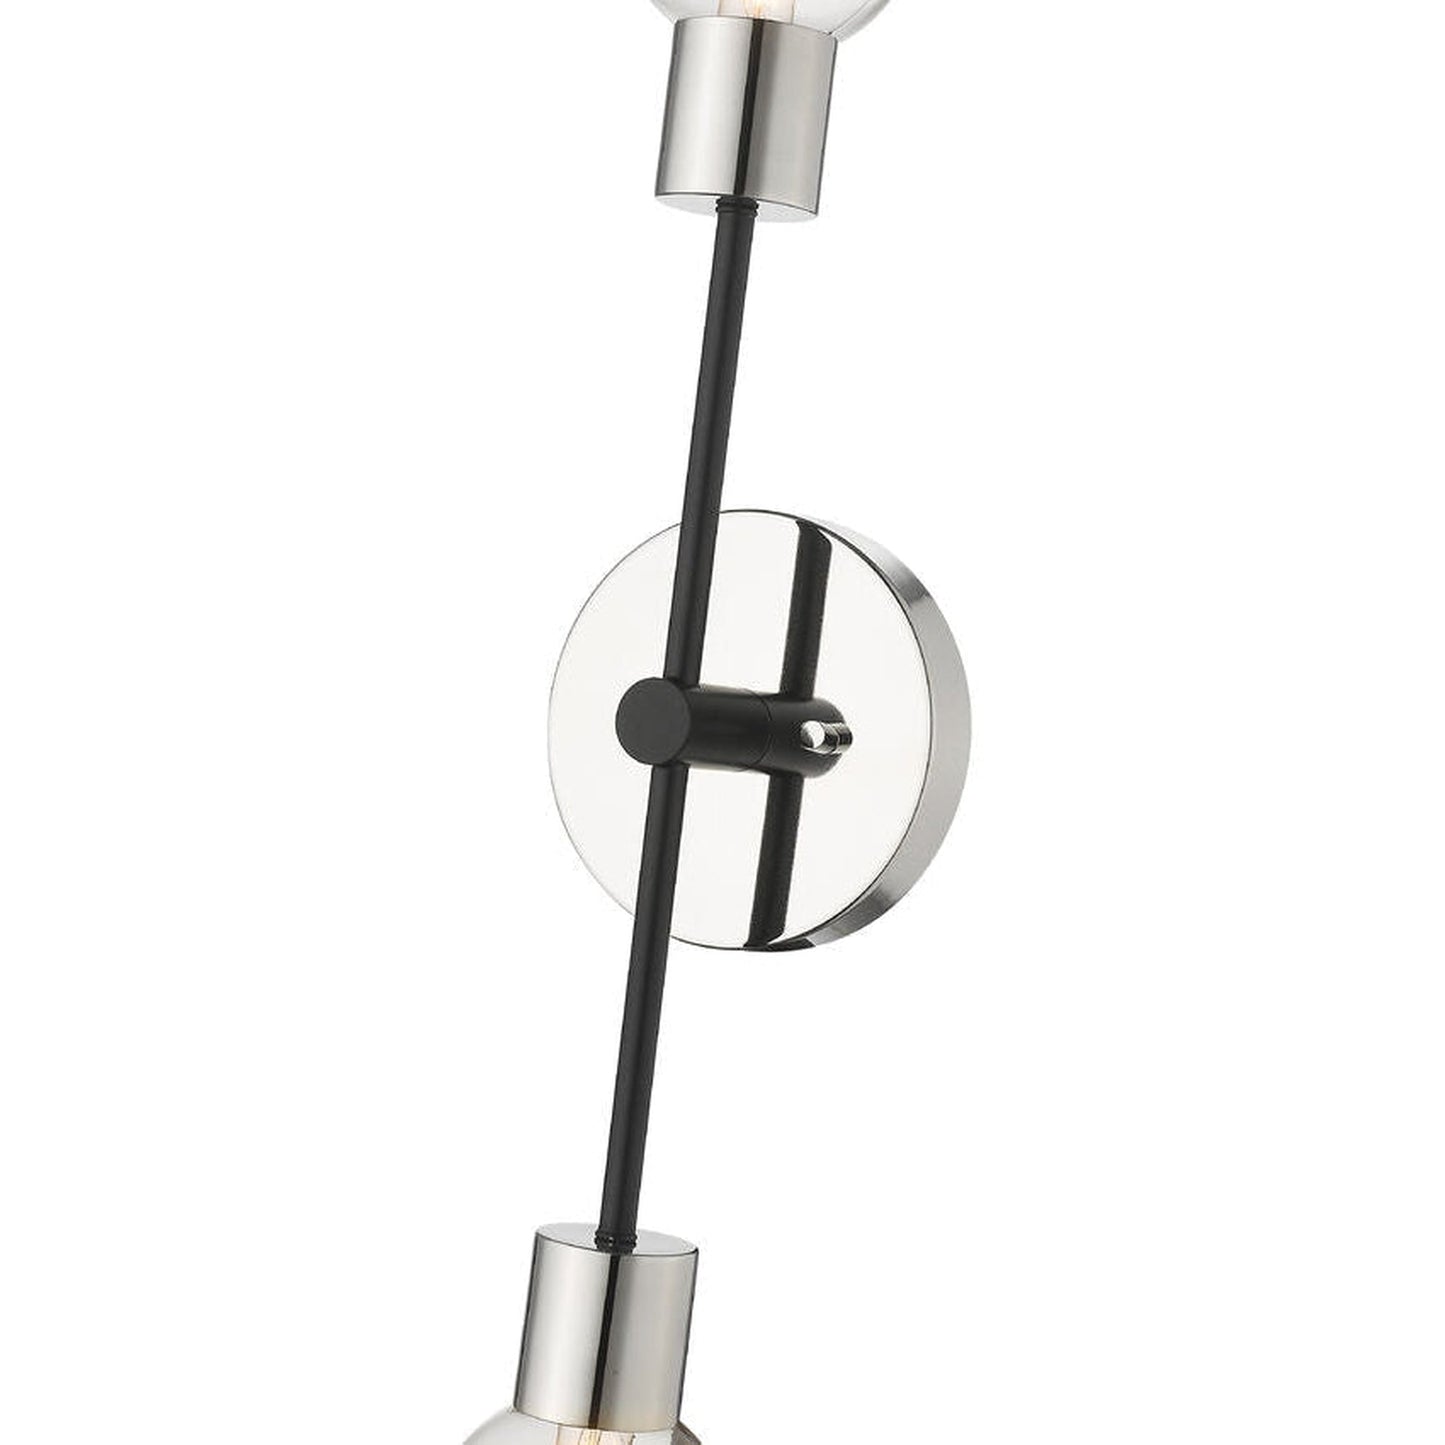 Z-Lite Neutra 6" 2-Light Matte Black and Polished Nickel Wall Sconce With Clear Glass Shade